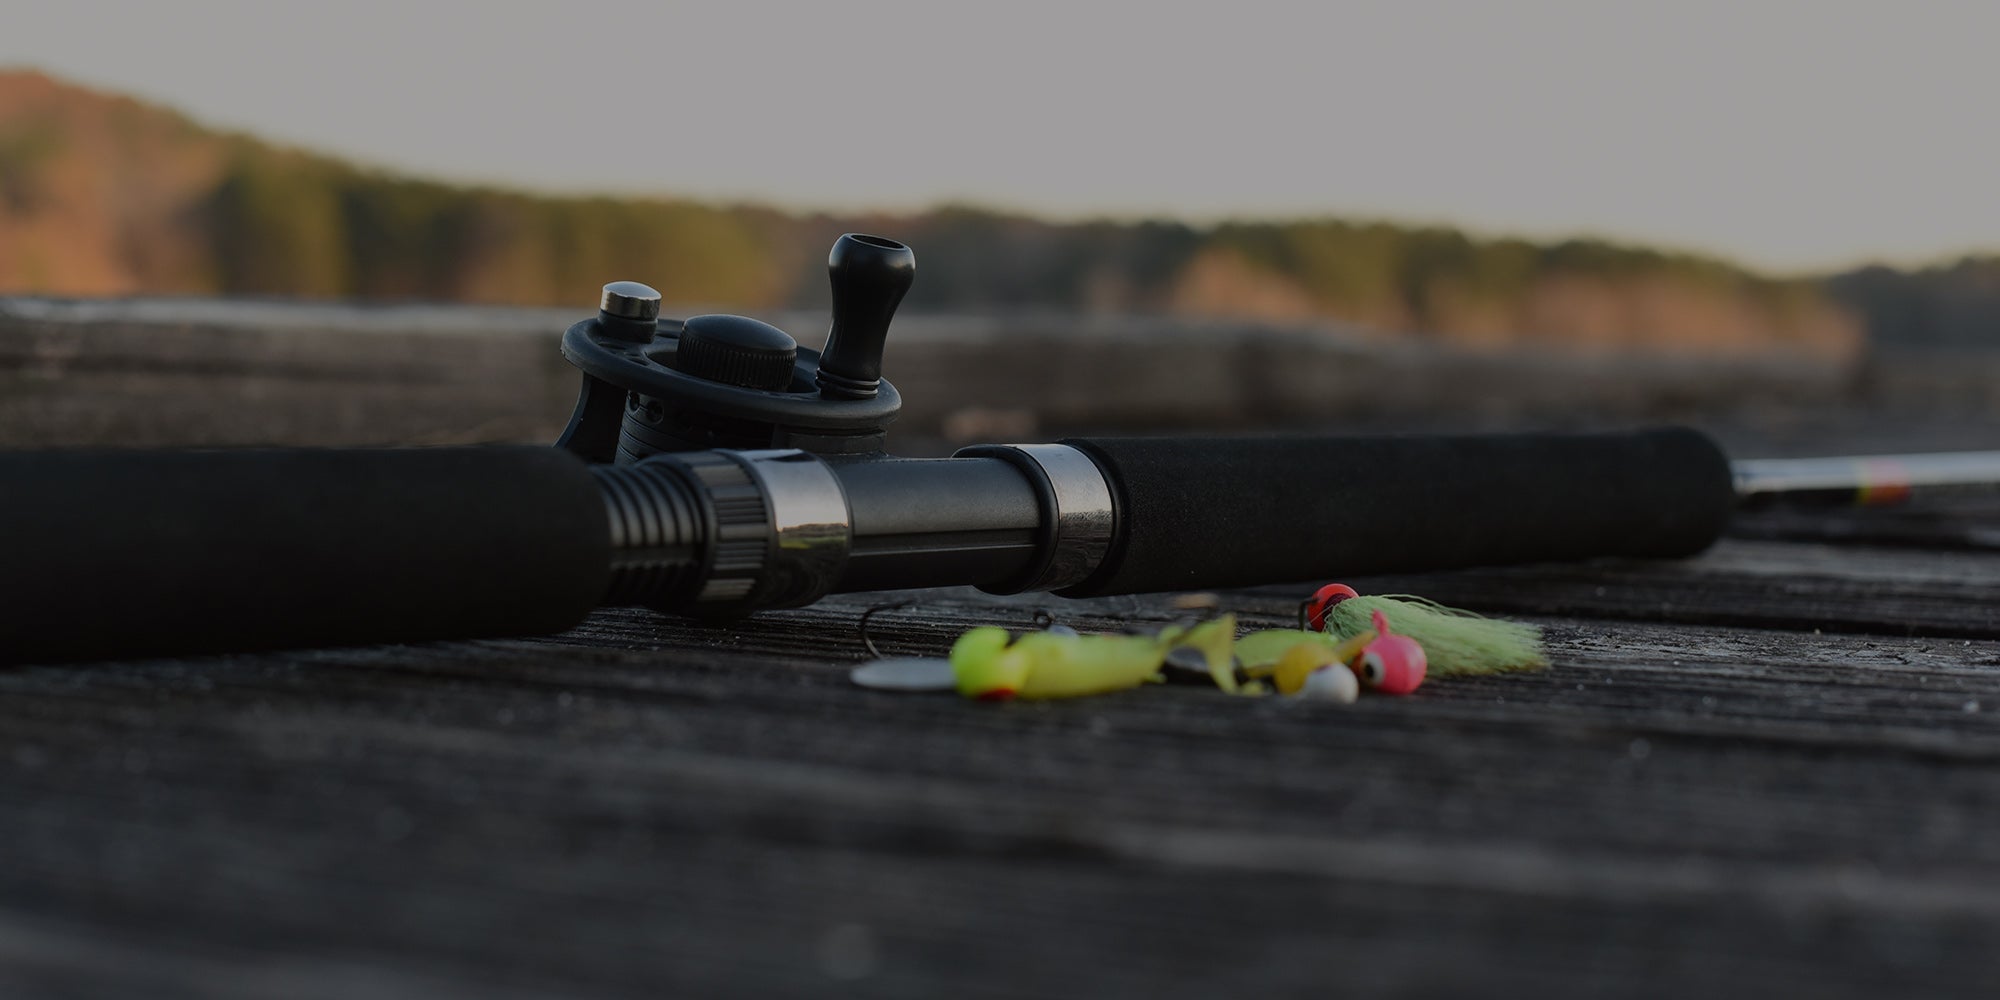 BnM Fishing Picture Contest #1521- ends 5/31/2015 - win BnM rods